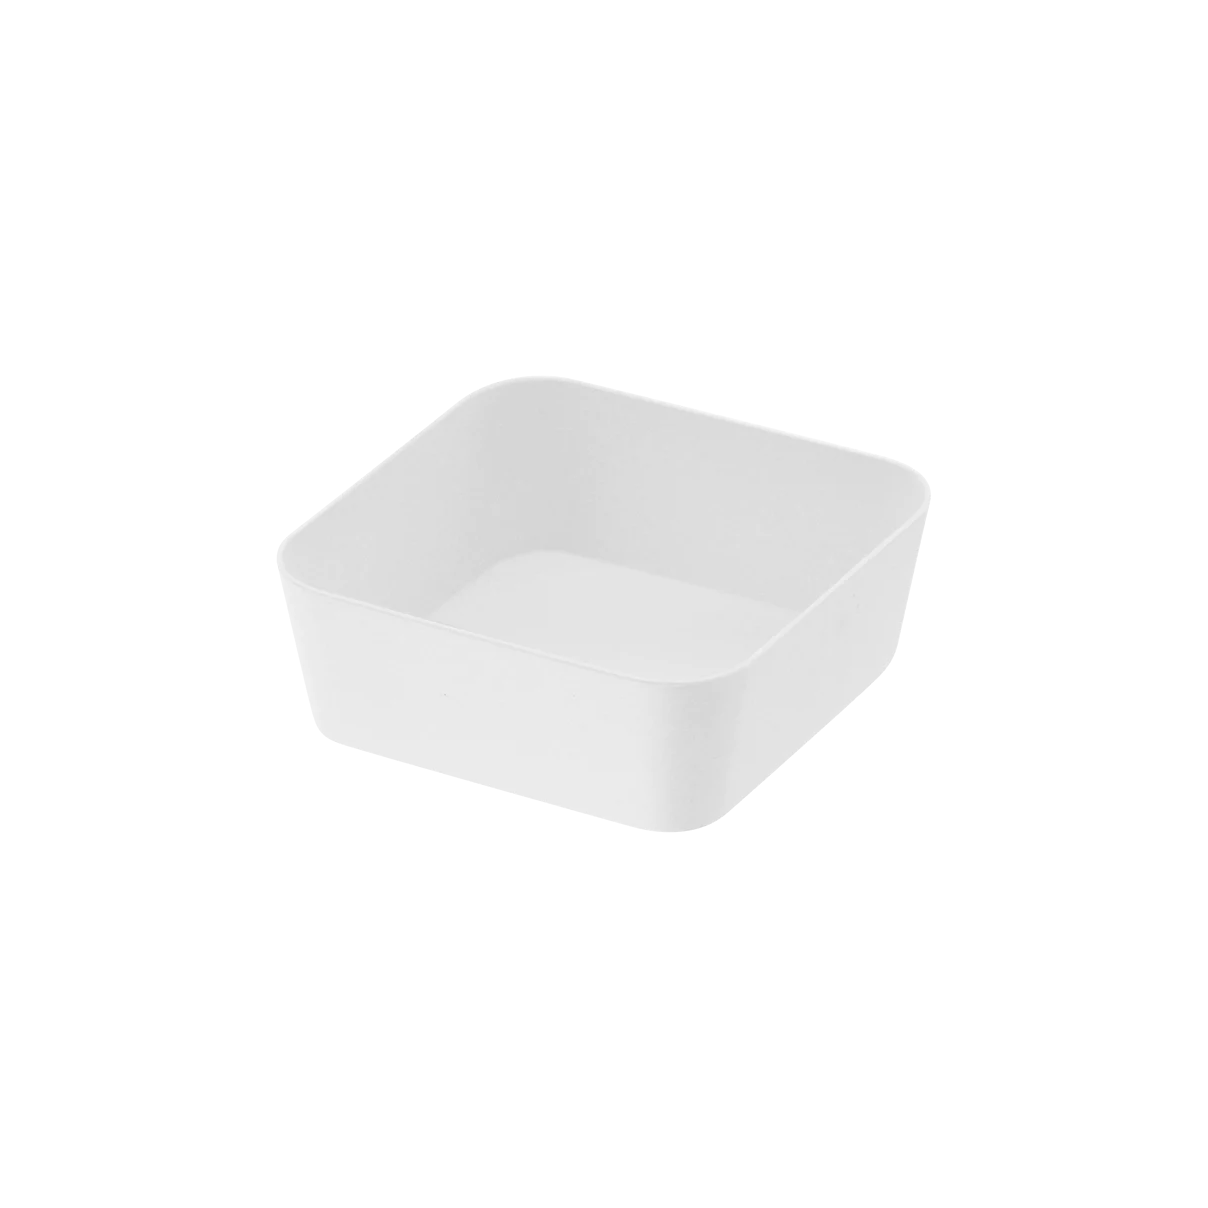 Amenity Tray White _ Size S, M or L